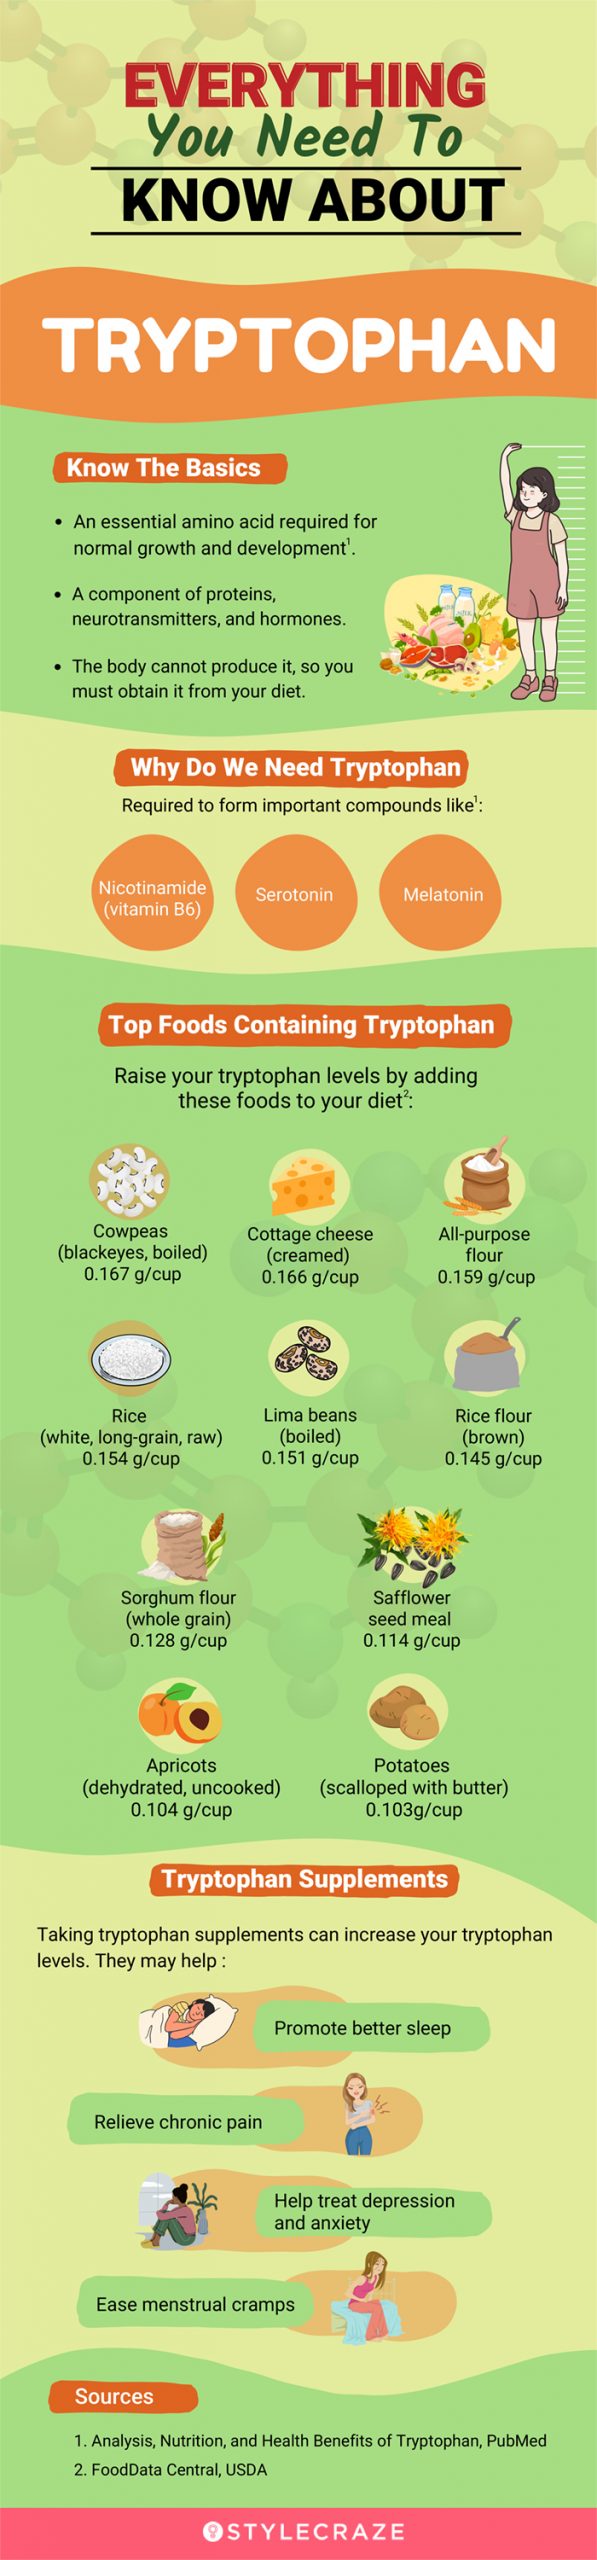 everything about tryptophan [infographic]